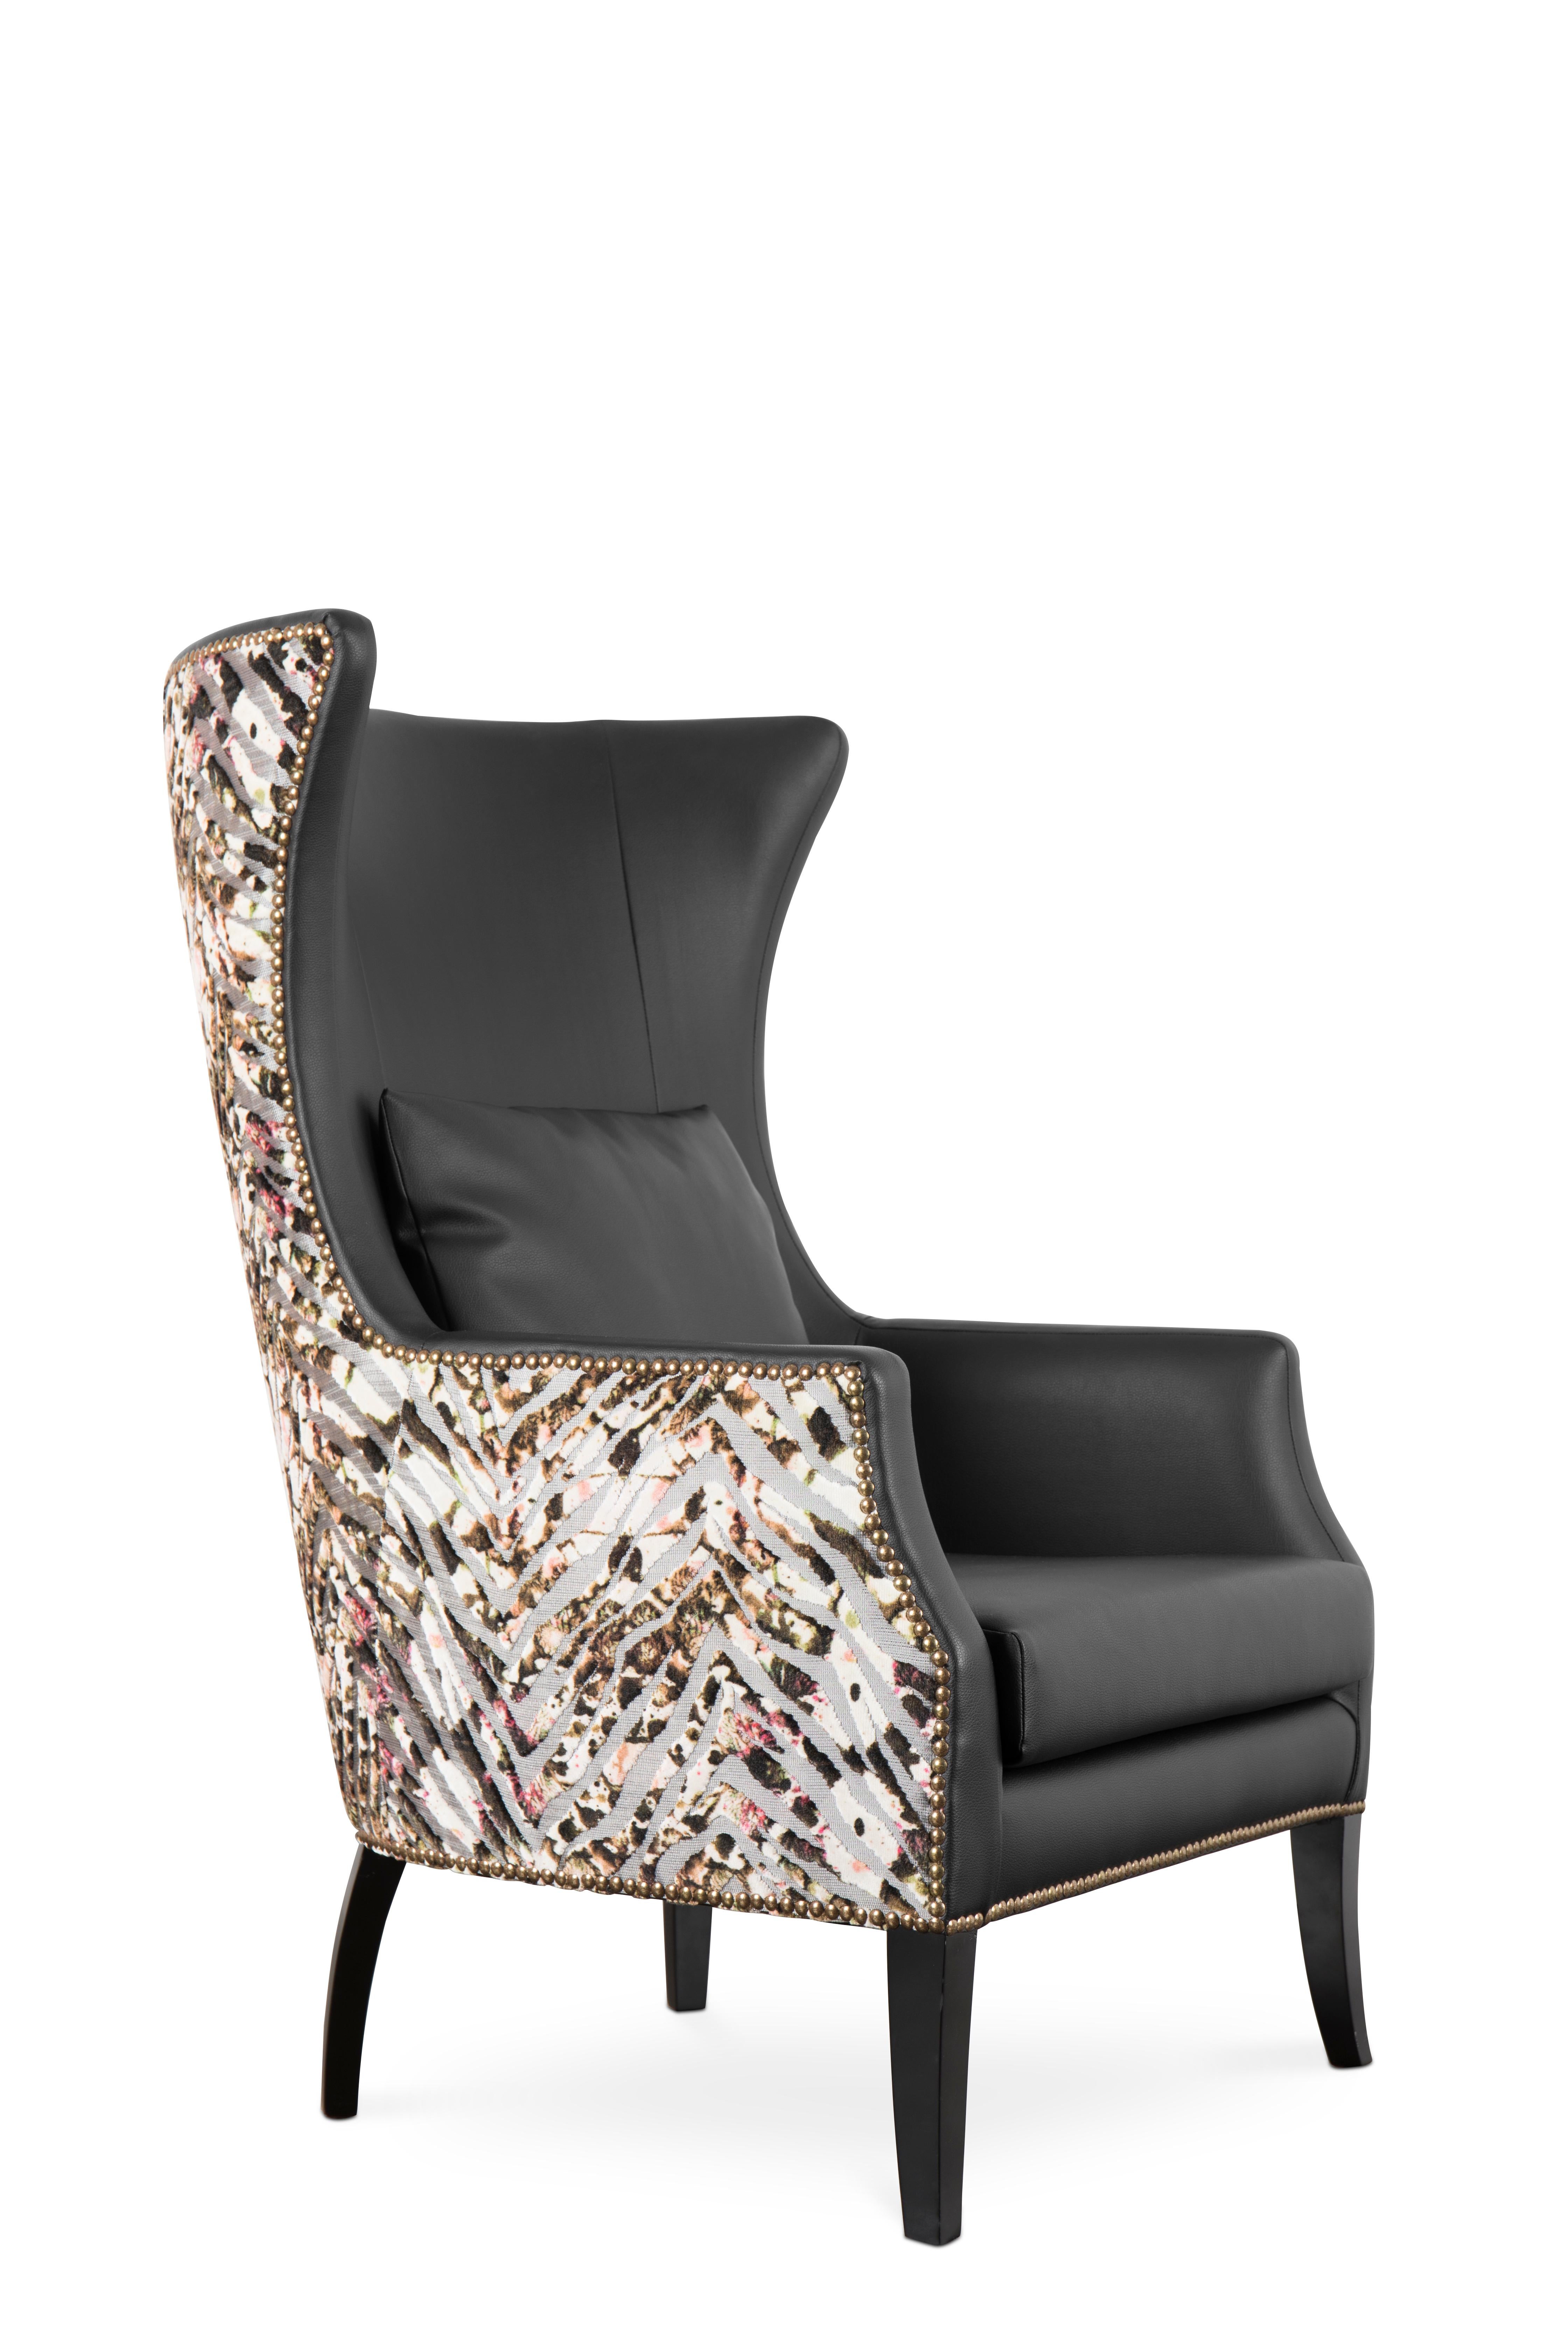 Dukono Armchair in Faux Leather With Aged Gold Nails For Sale 2